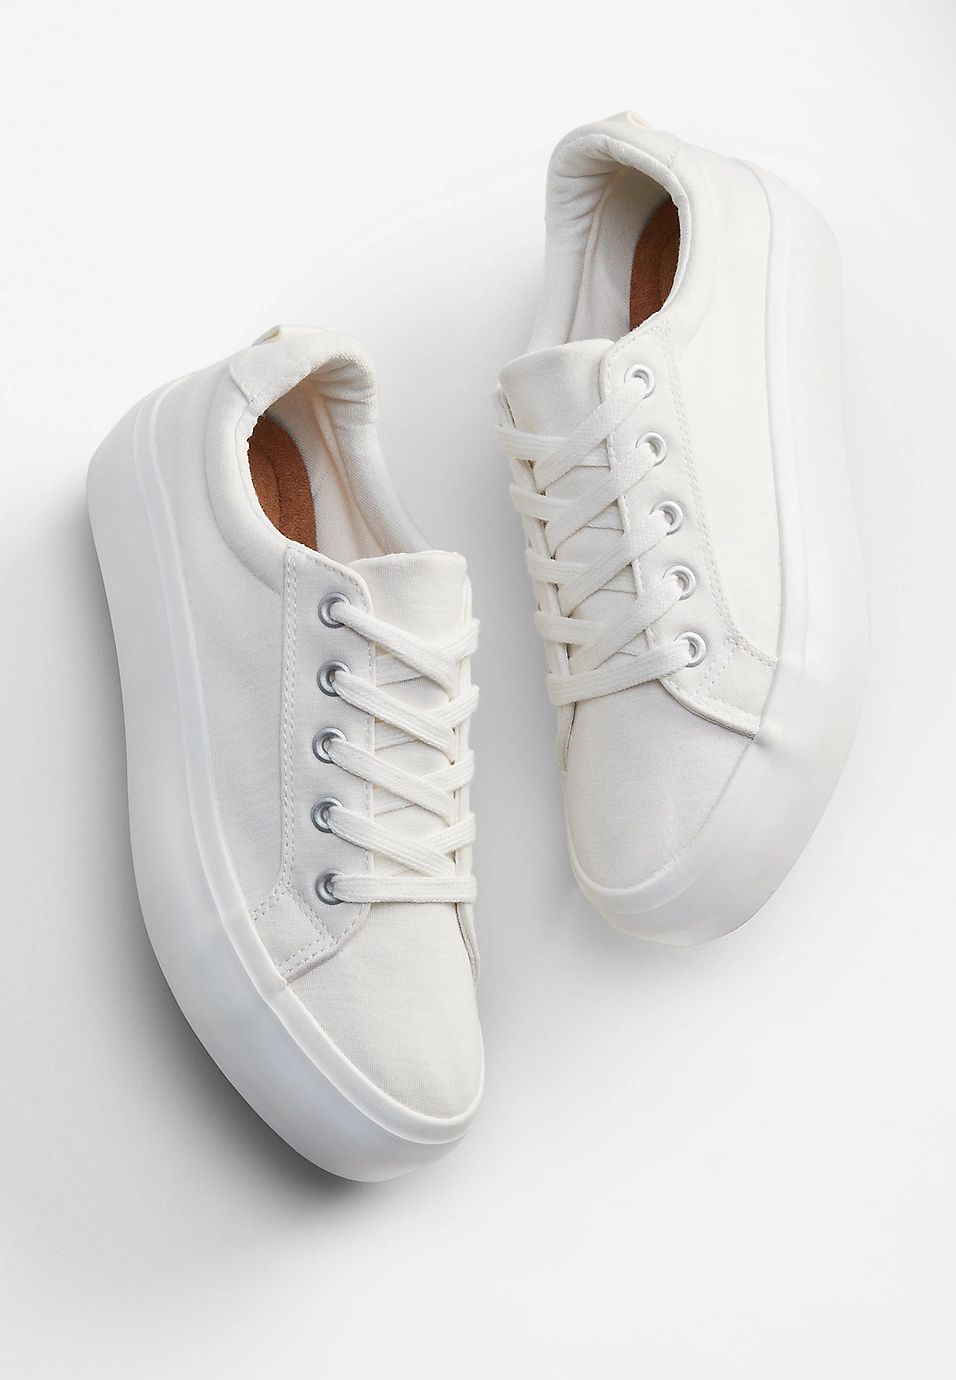 SuperCush Kyra White Platform Lace Up Sneaker | Maurices